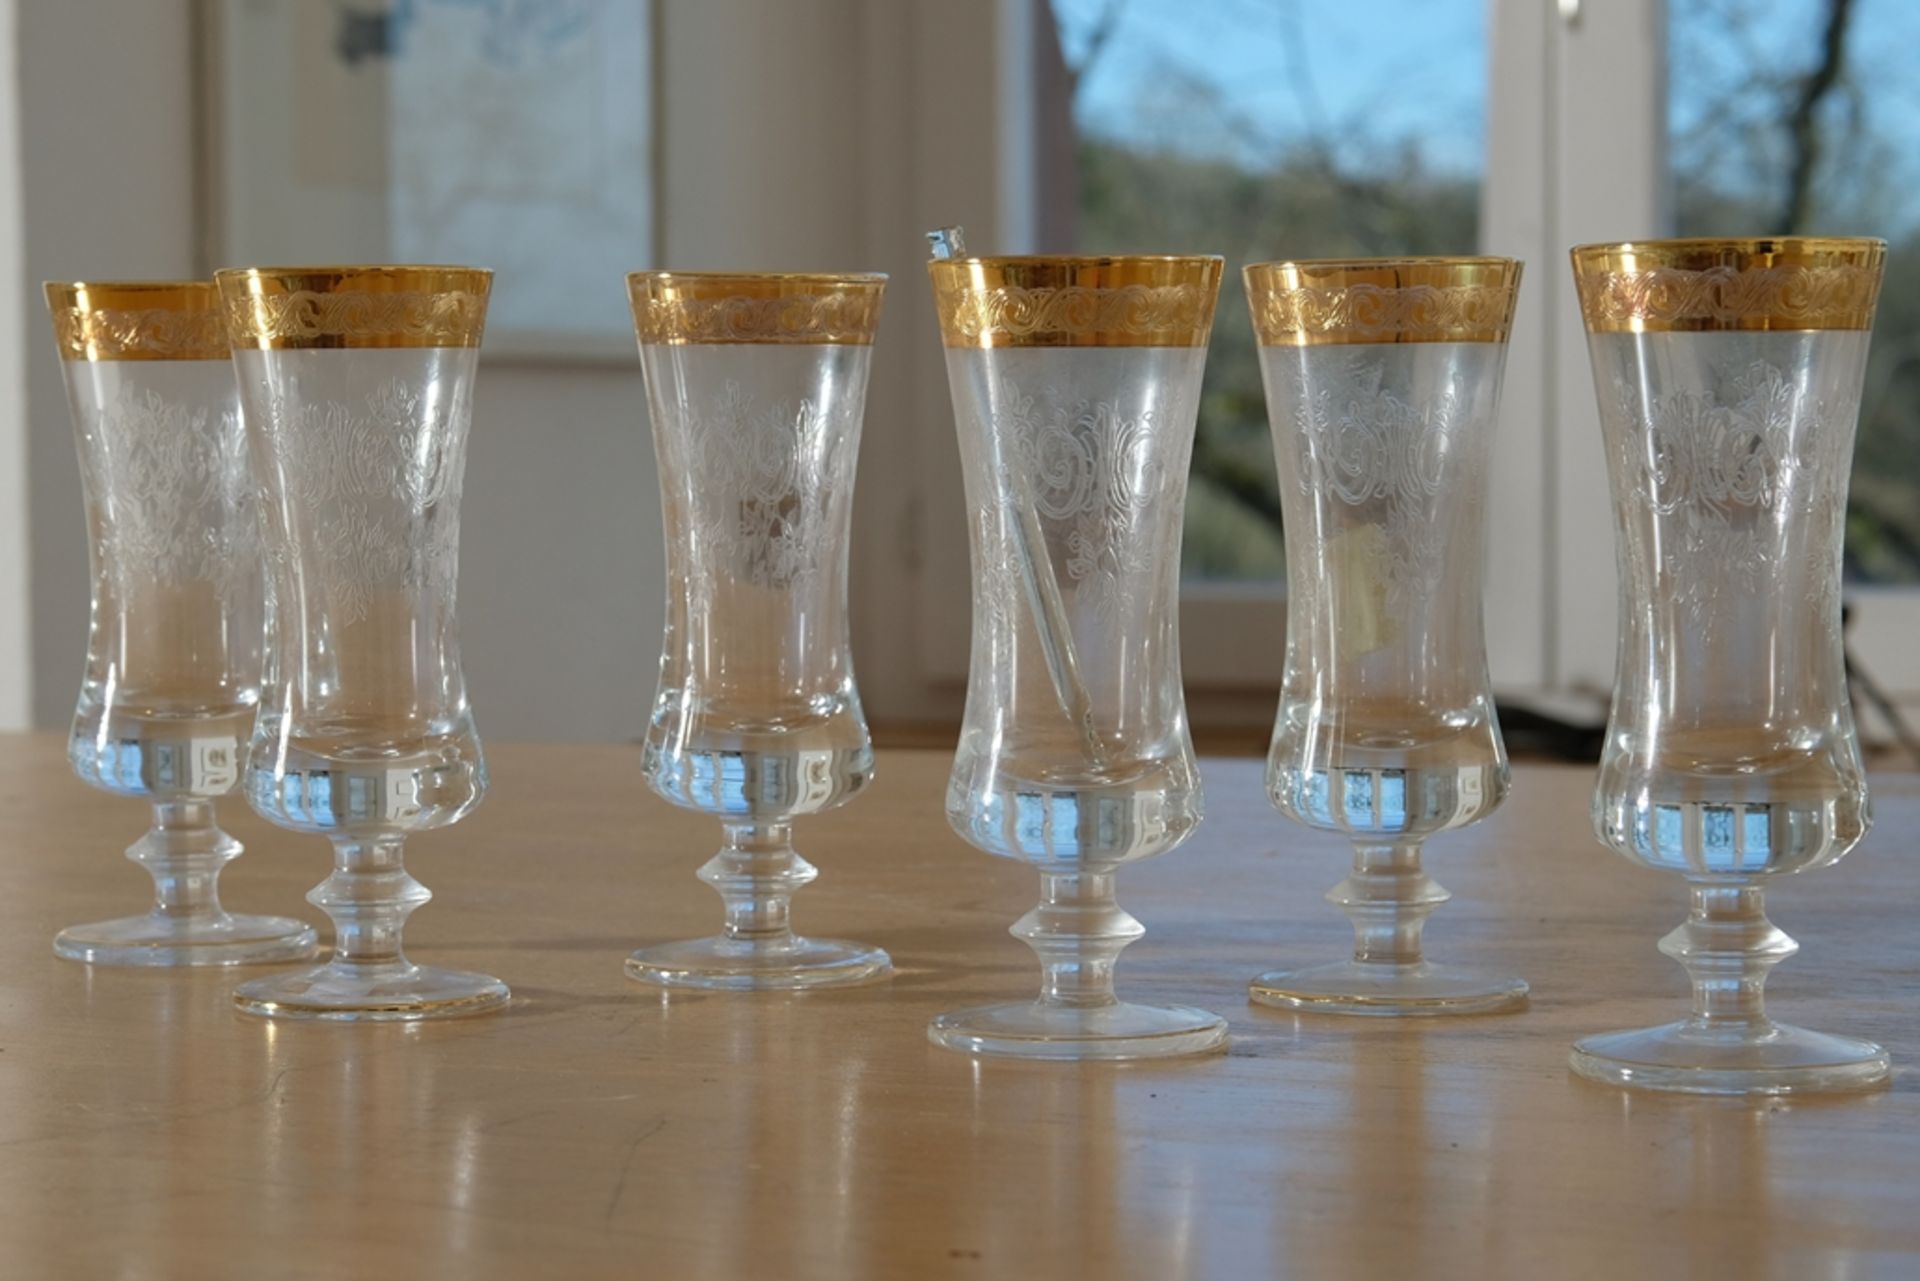 Murano Medici gold rim, six champagne flutes, crystal glass engraved with plant motifs.